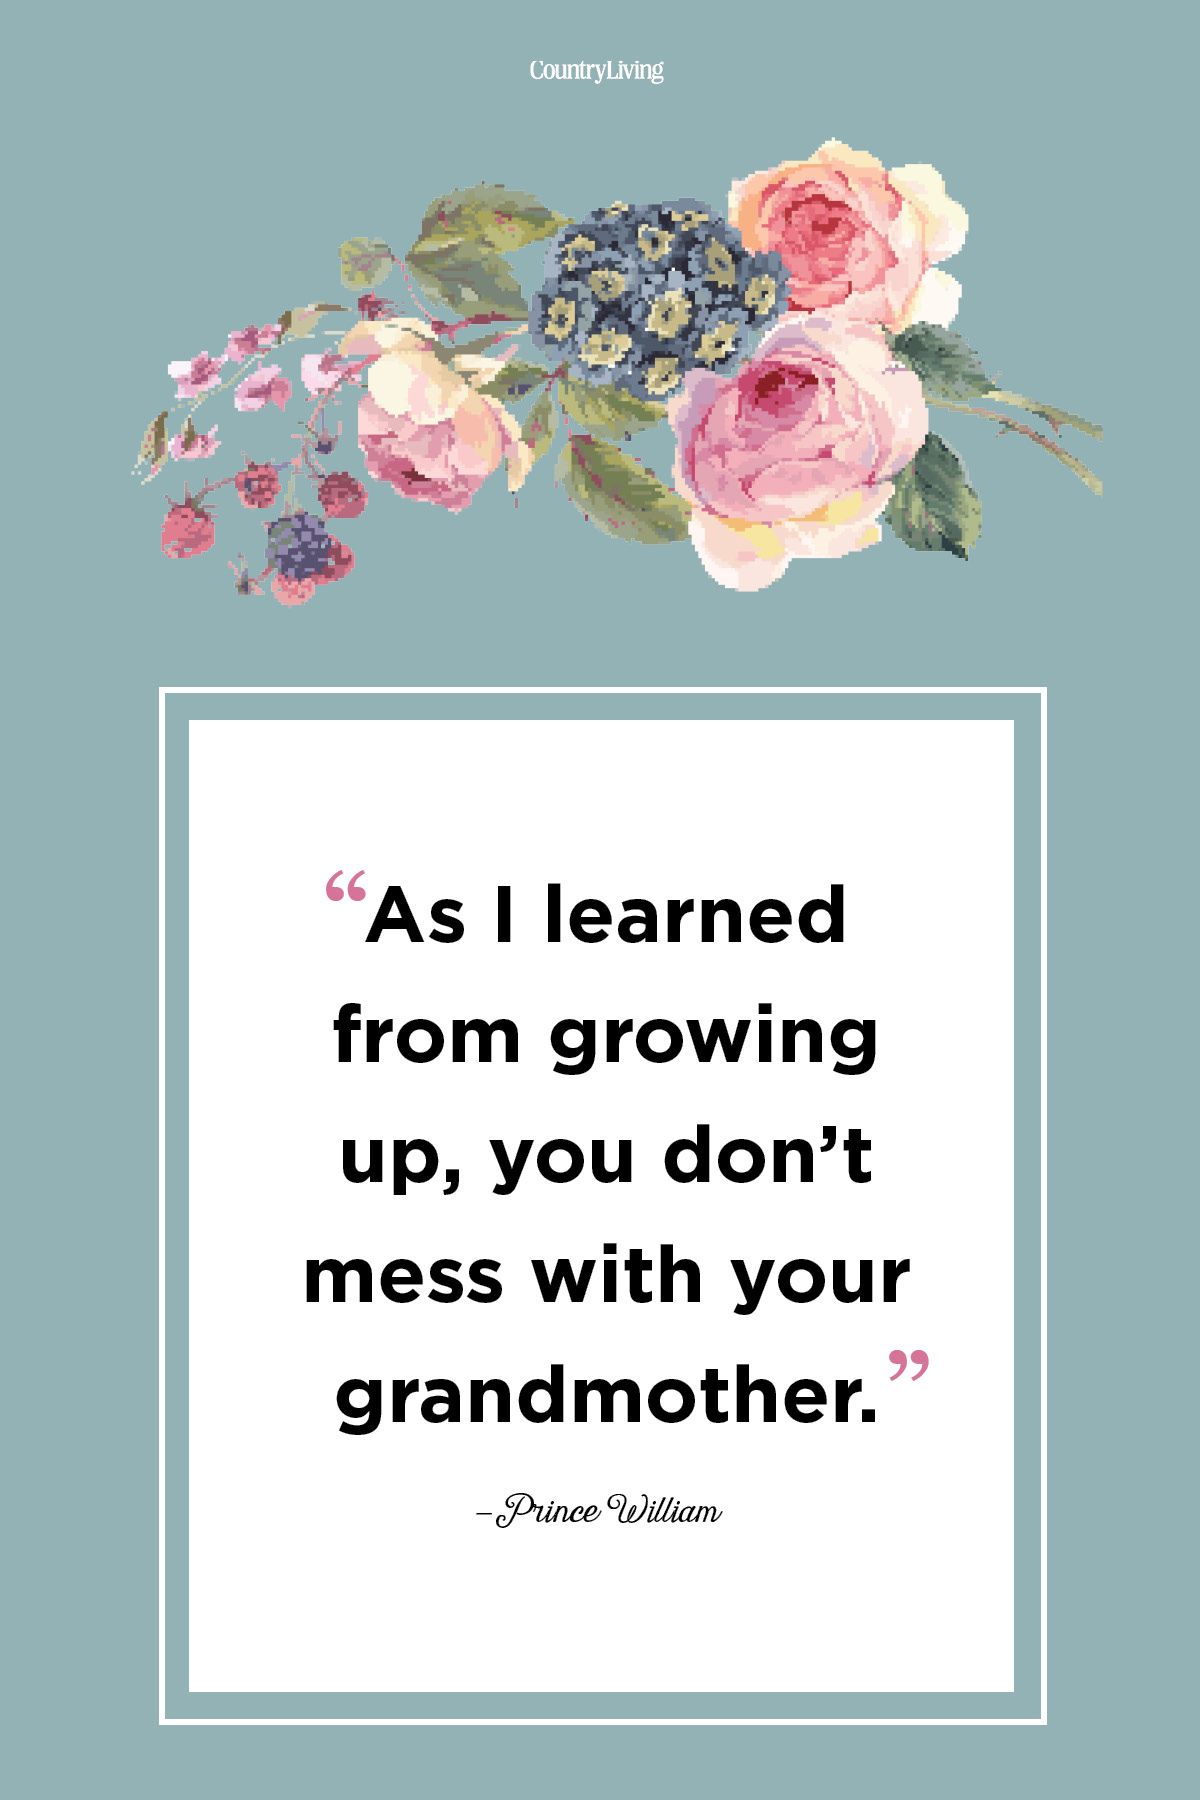 34 Grandma Love Quotes - Best Grandmother Quotes and Sayings